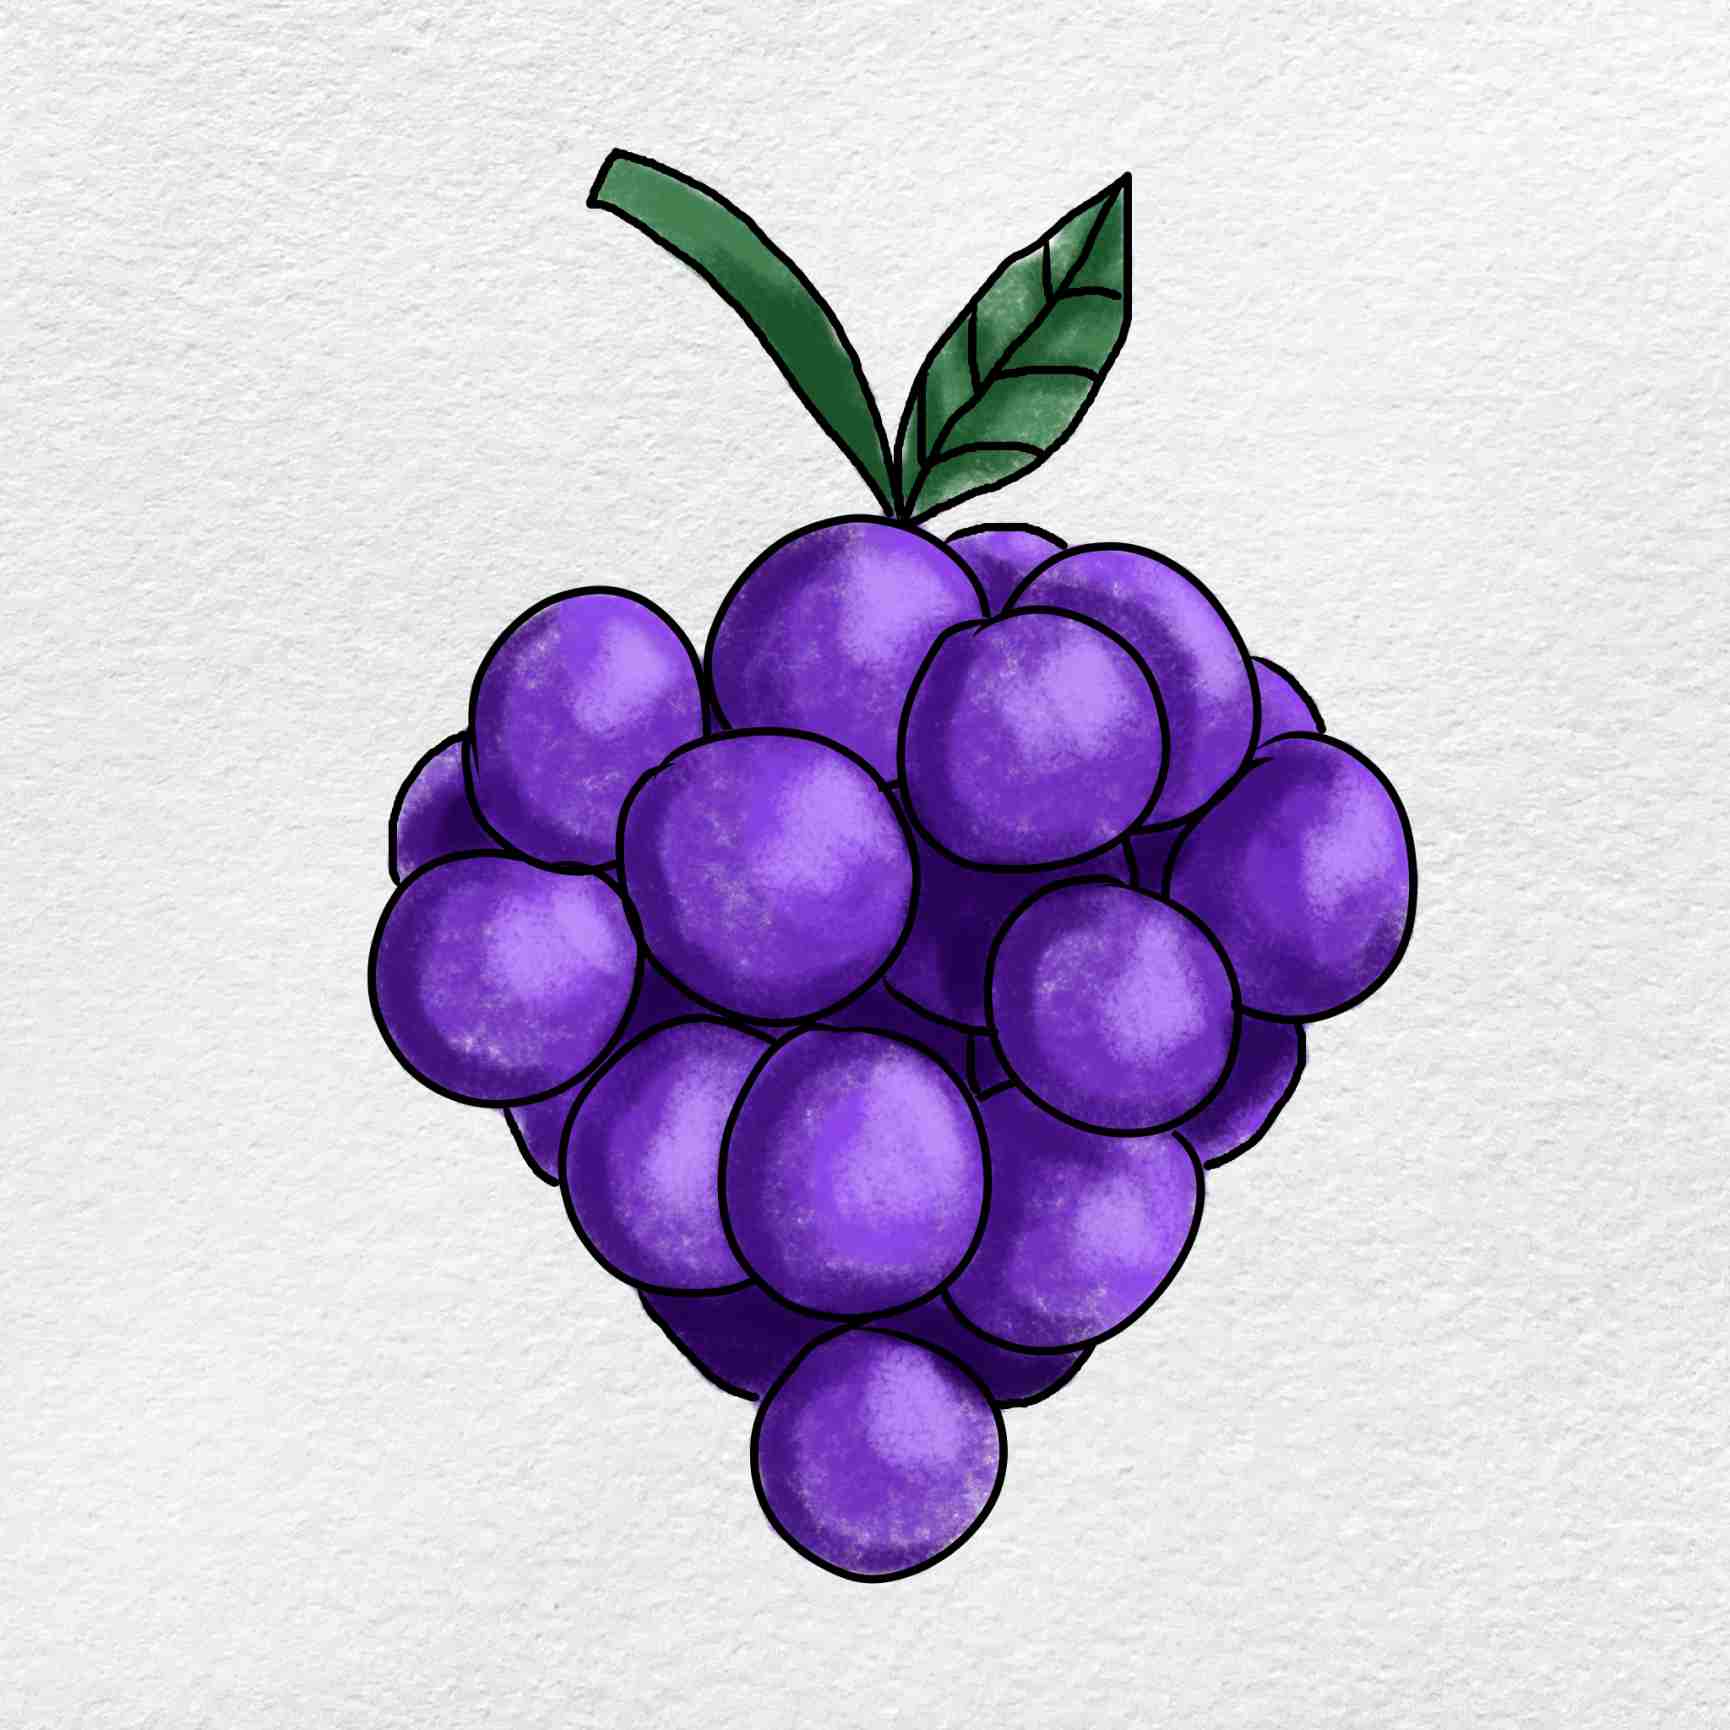 grapes drawing easy